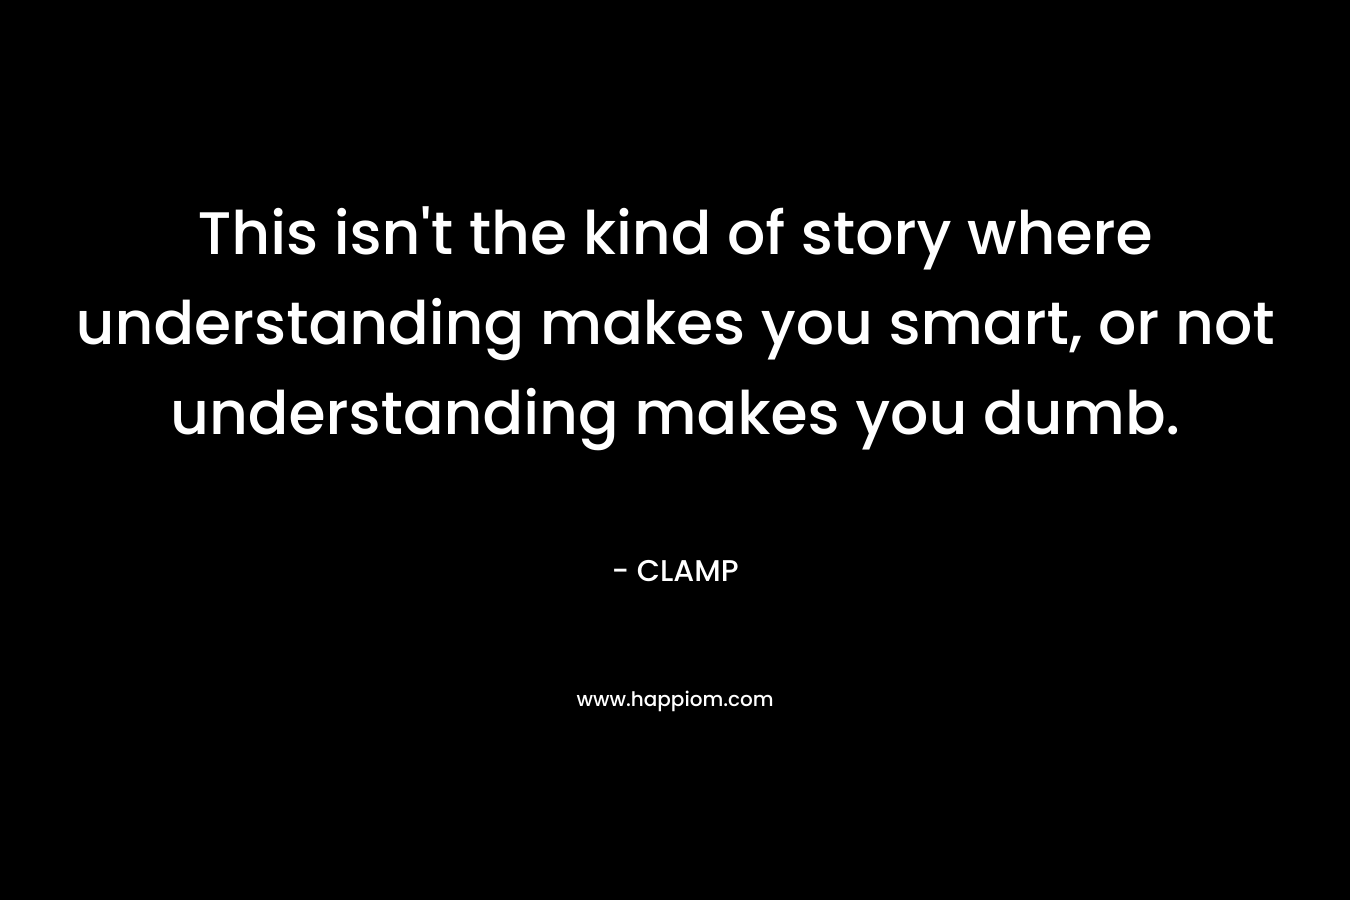 This isn’t the kind of story where understanding makes you smart, or not understanding makes you dumb. – CLAMP